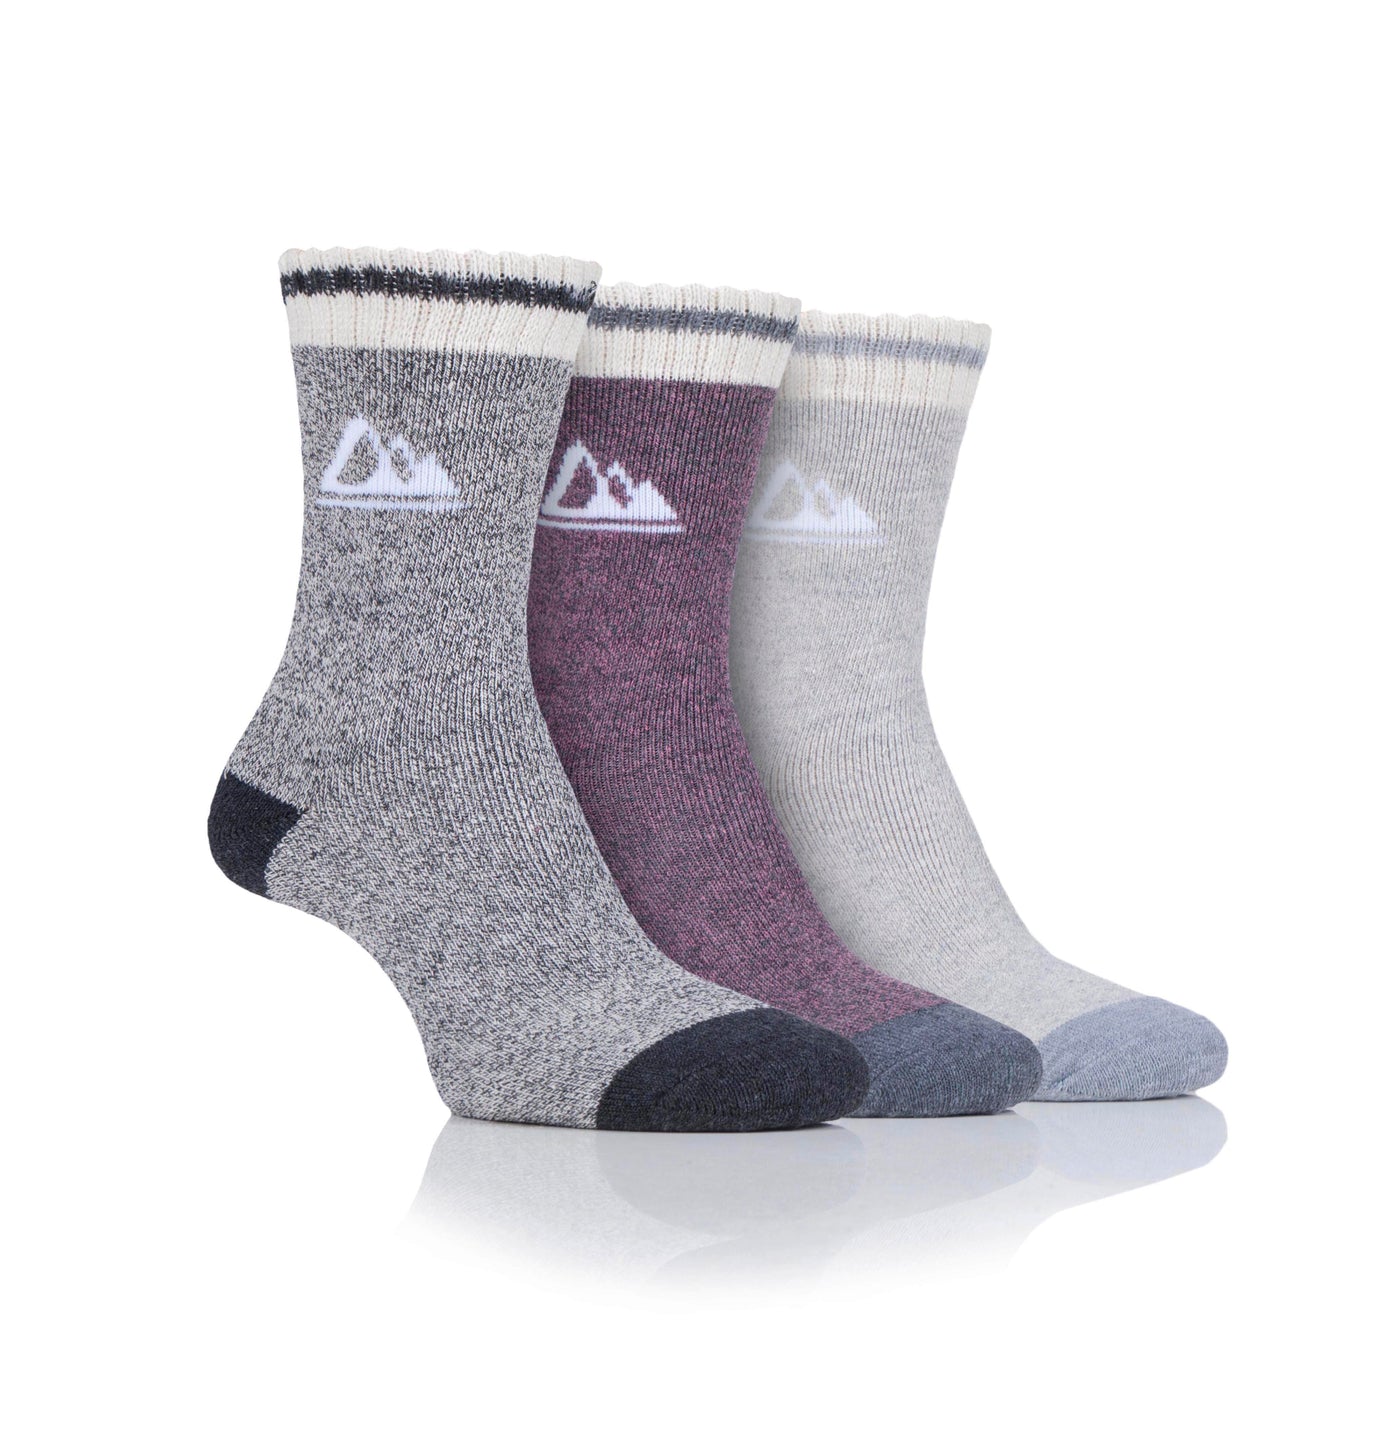 Women's socks "Performance" by Storm Valley (pack of 3 pairs)